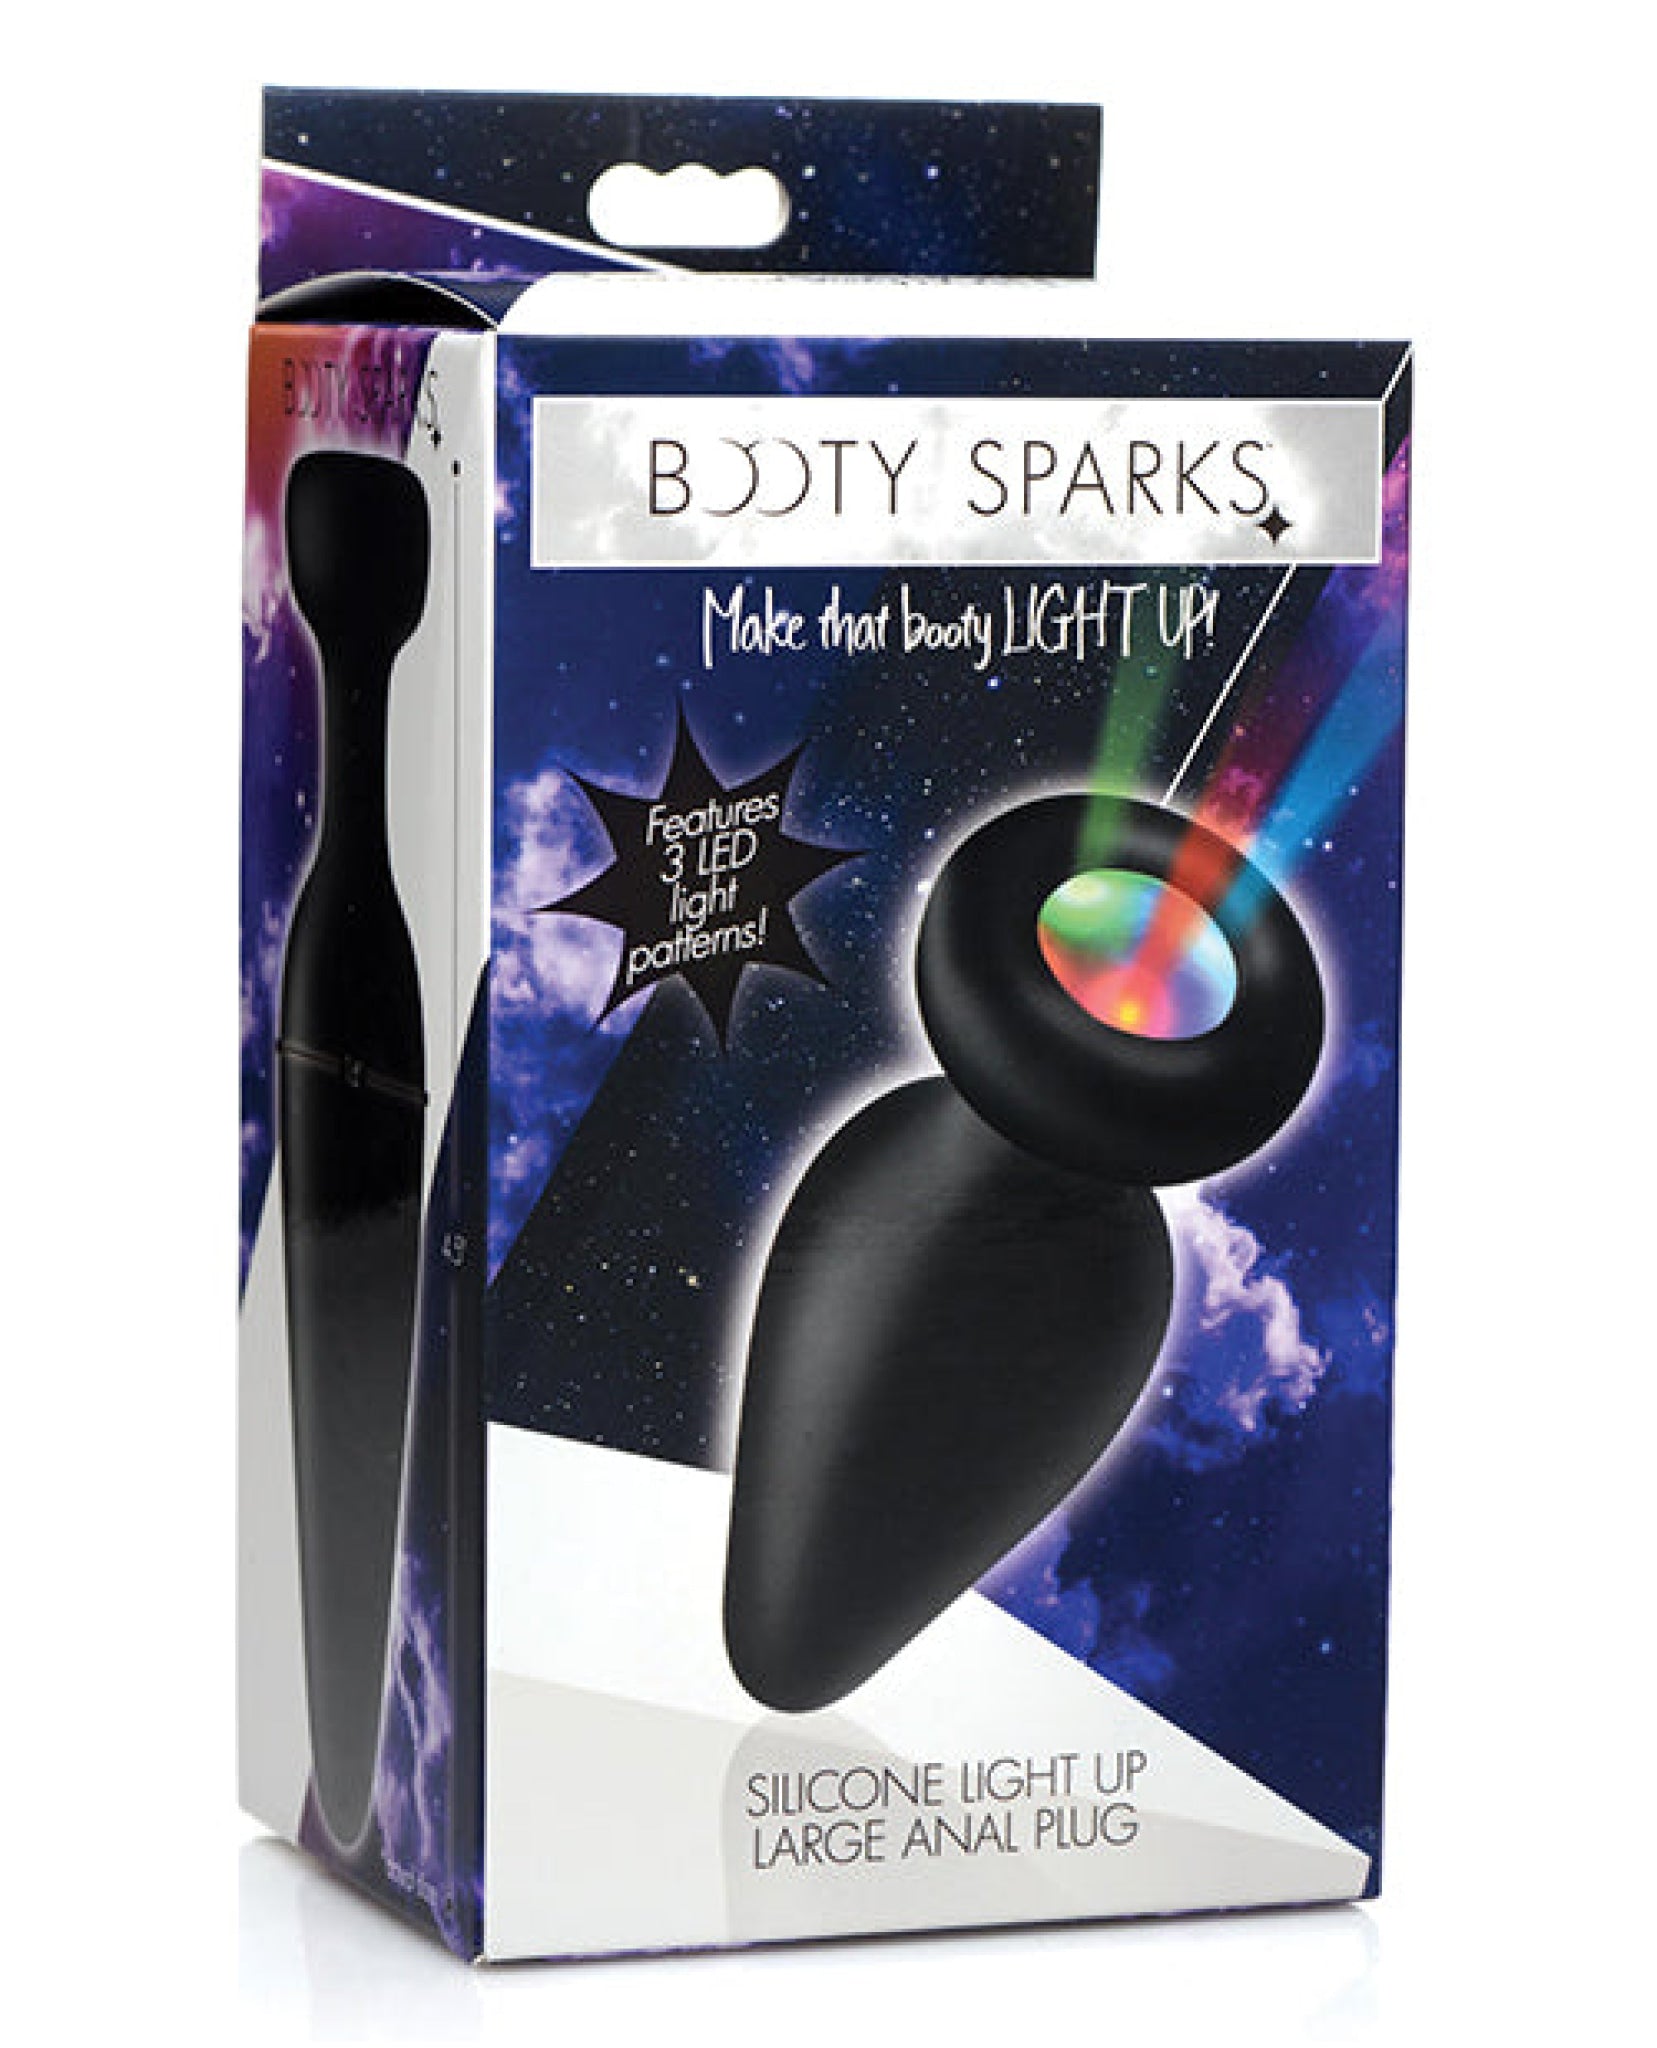 Booty Sparks Silicone Light Up Anal Plug Booty Sparks